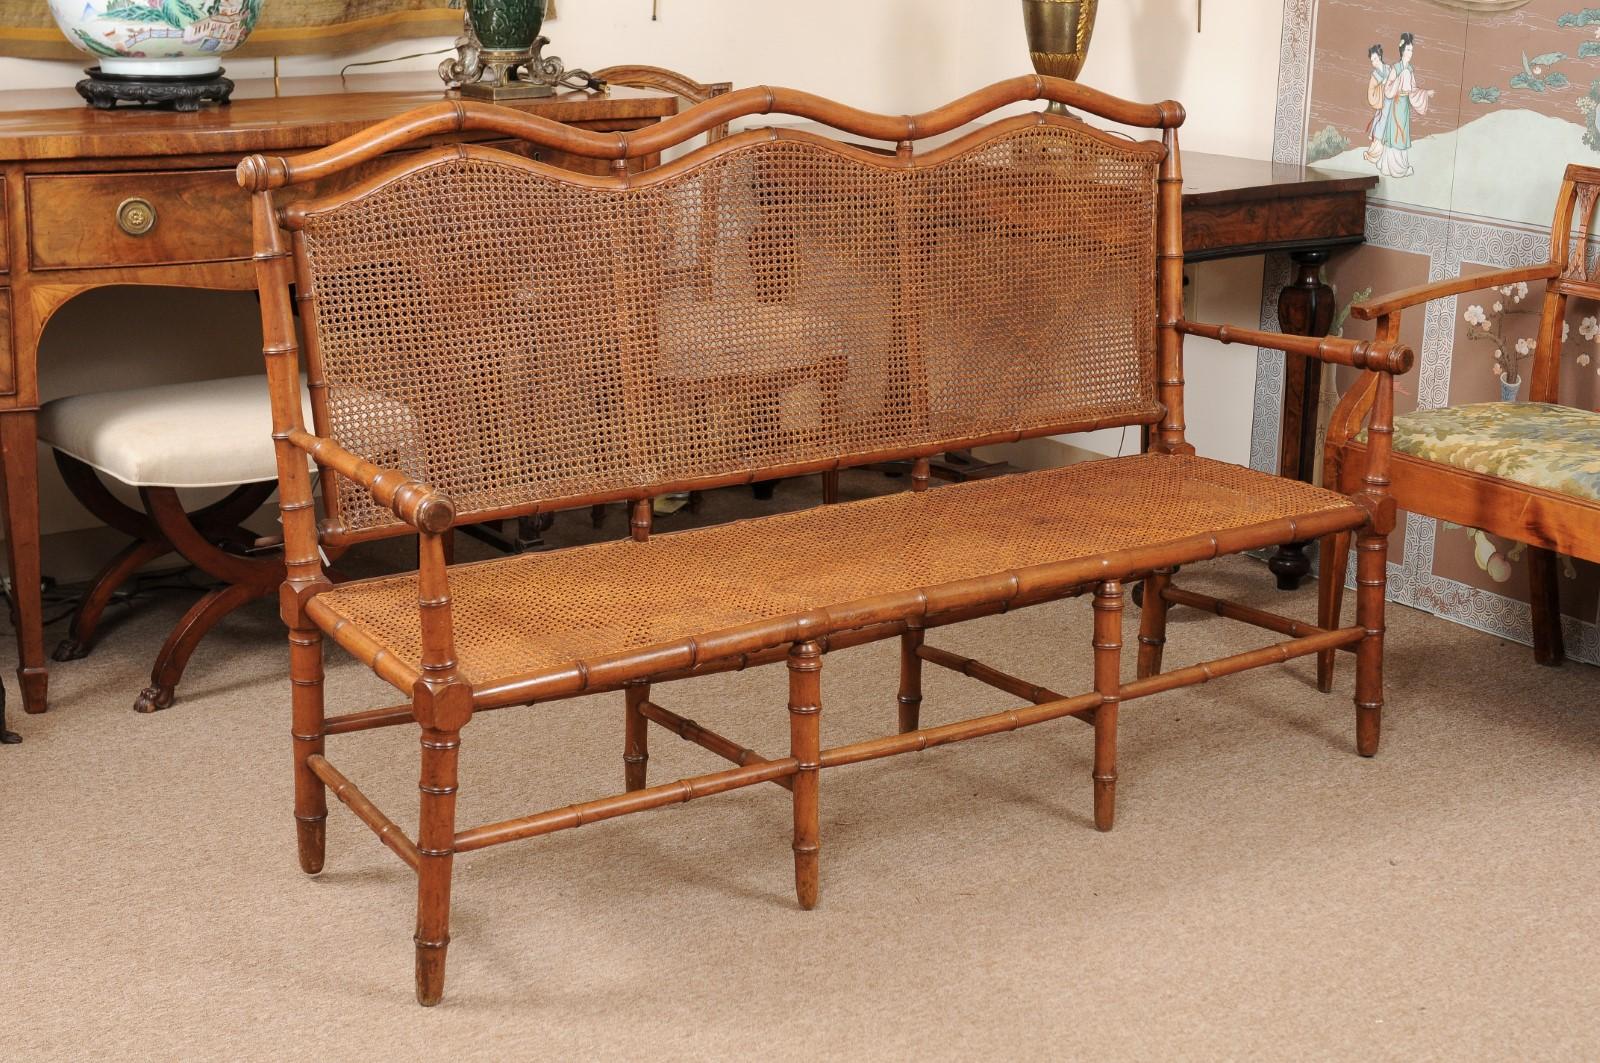 A bamboo style bench with caned back and seat. The bench dating from the late 19th century and French in origin. 

 